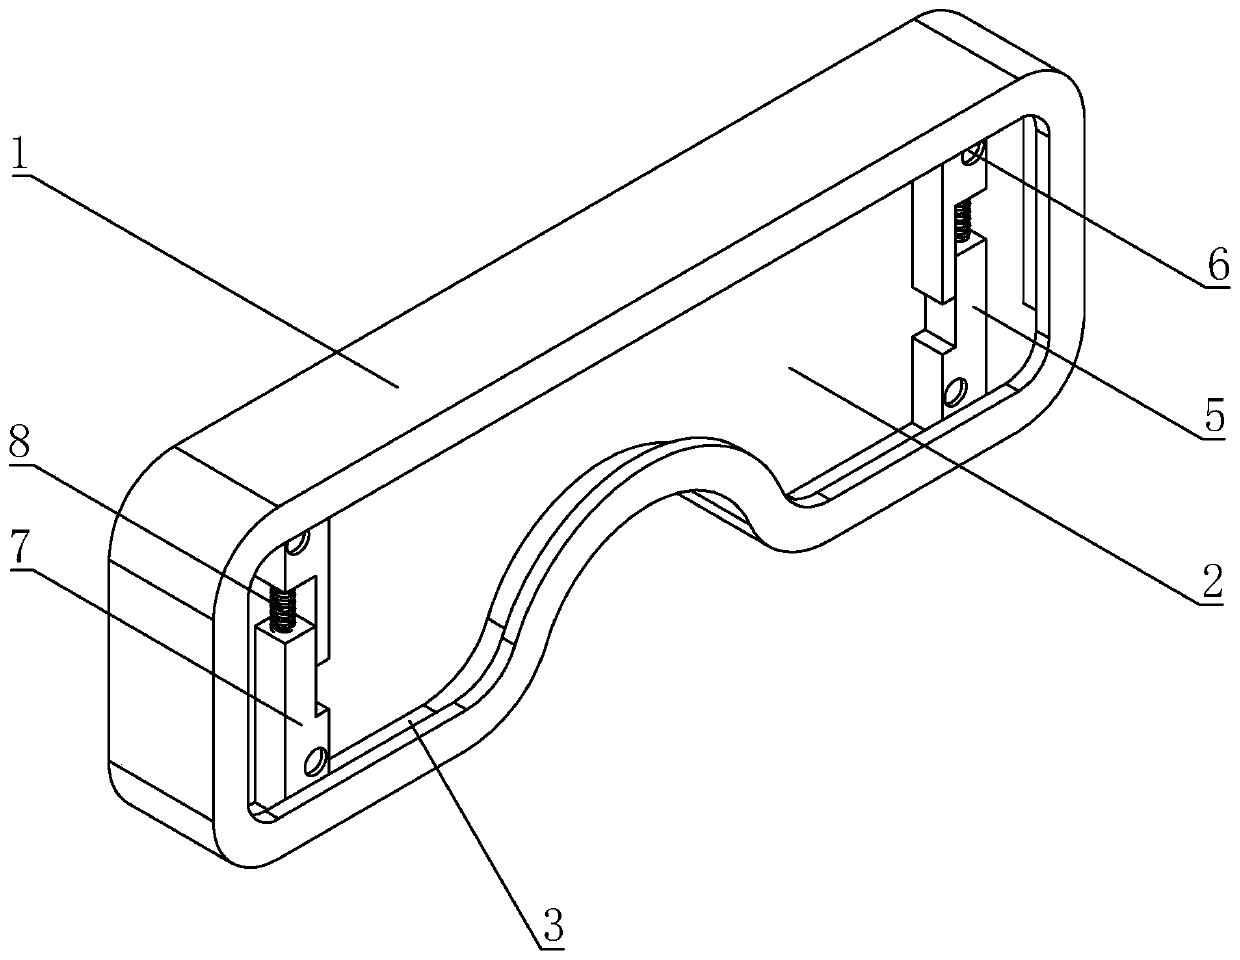 Goggles with defogging mechanisms